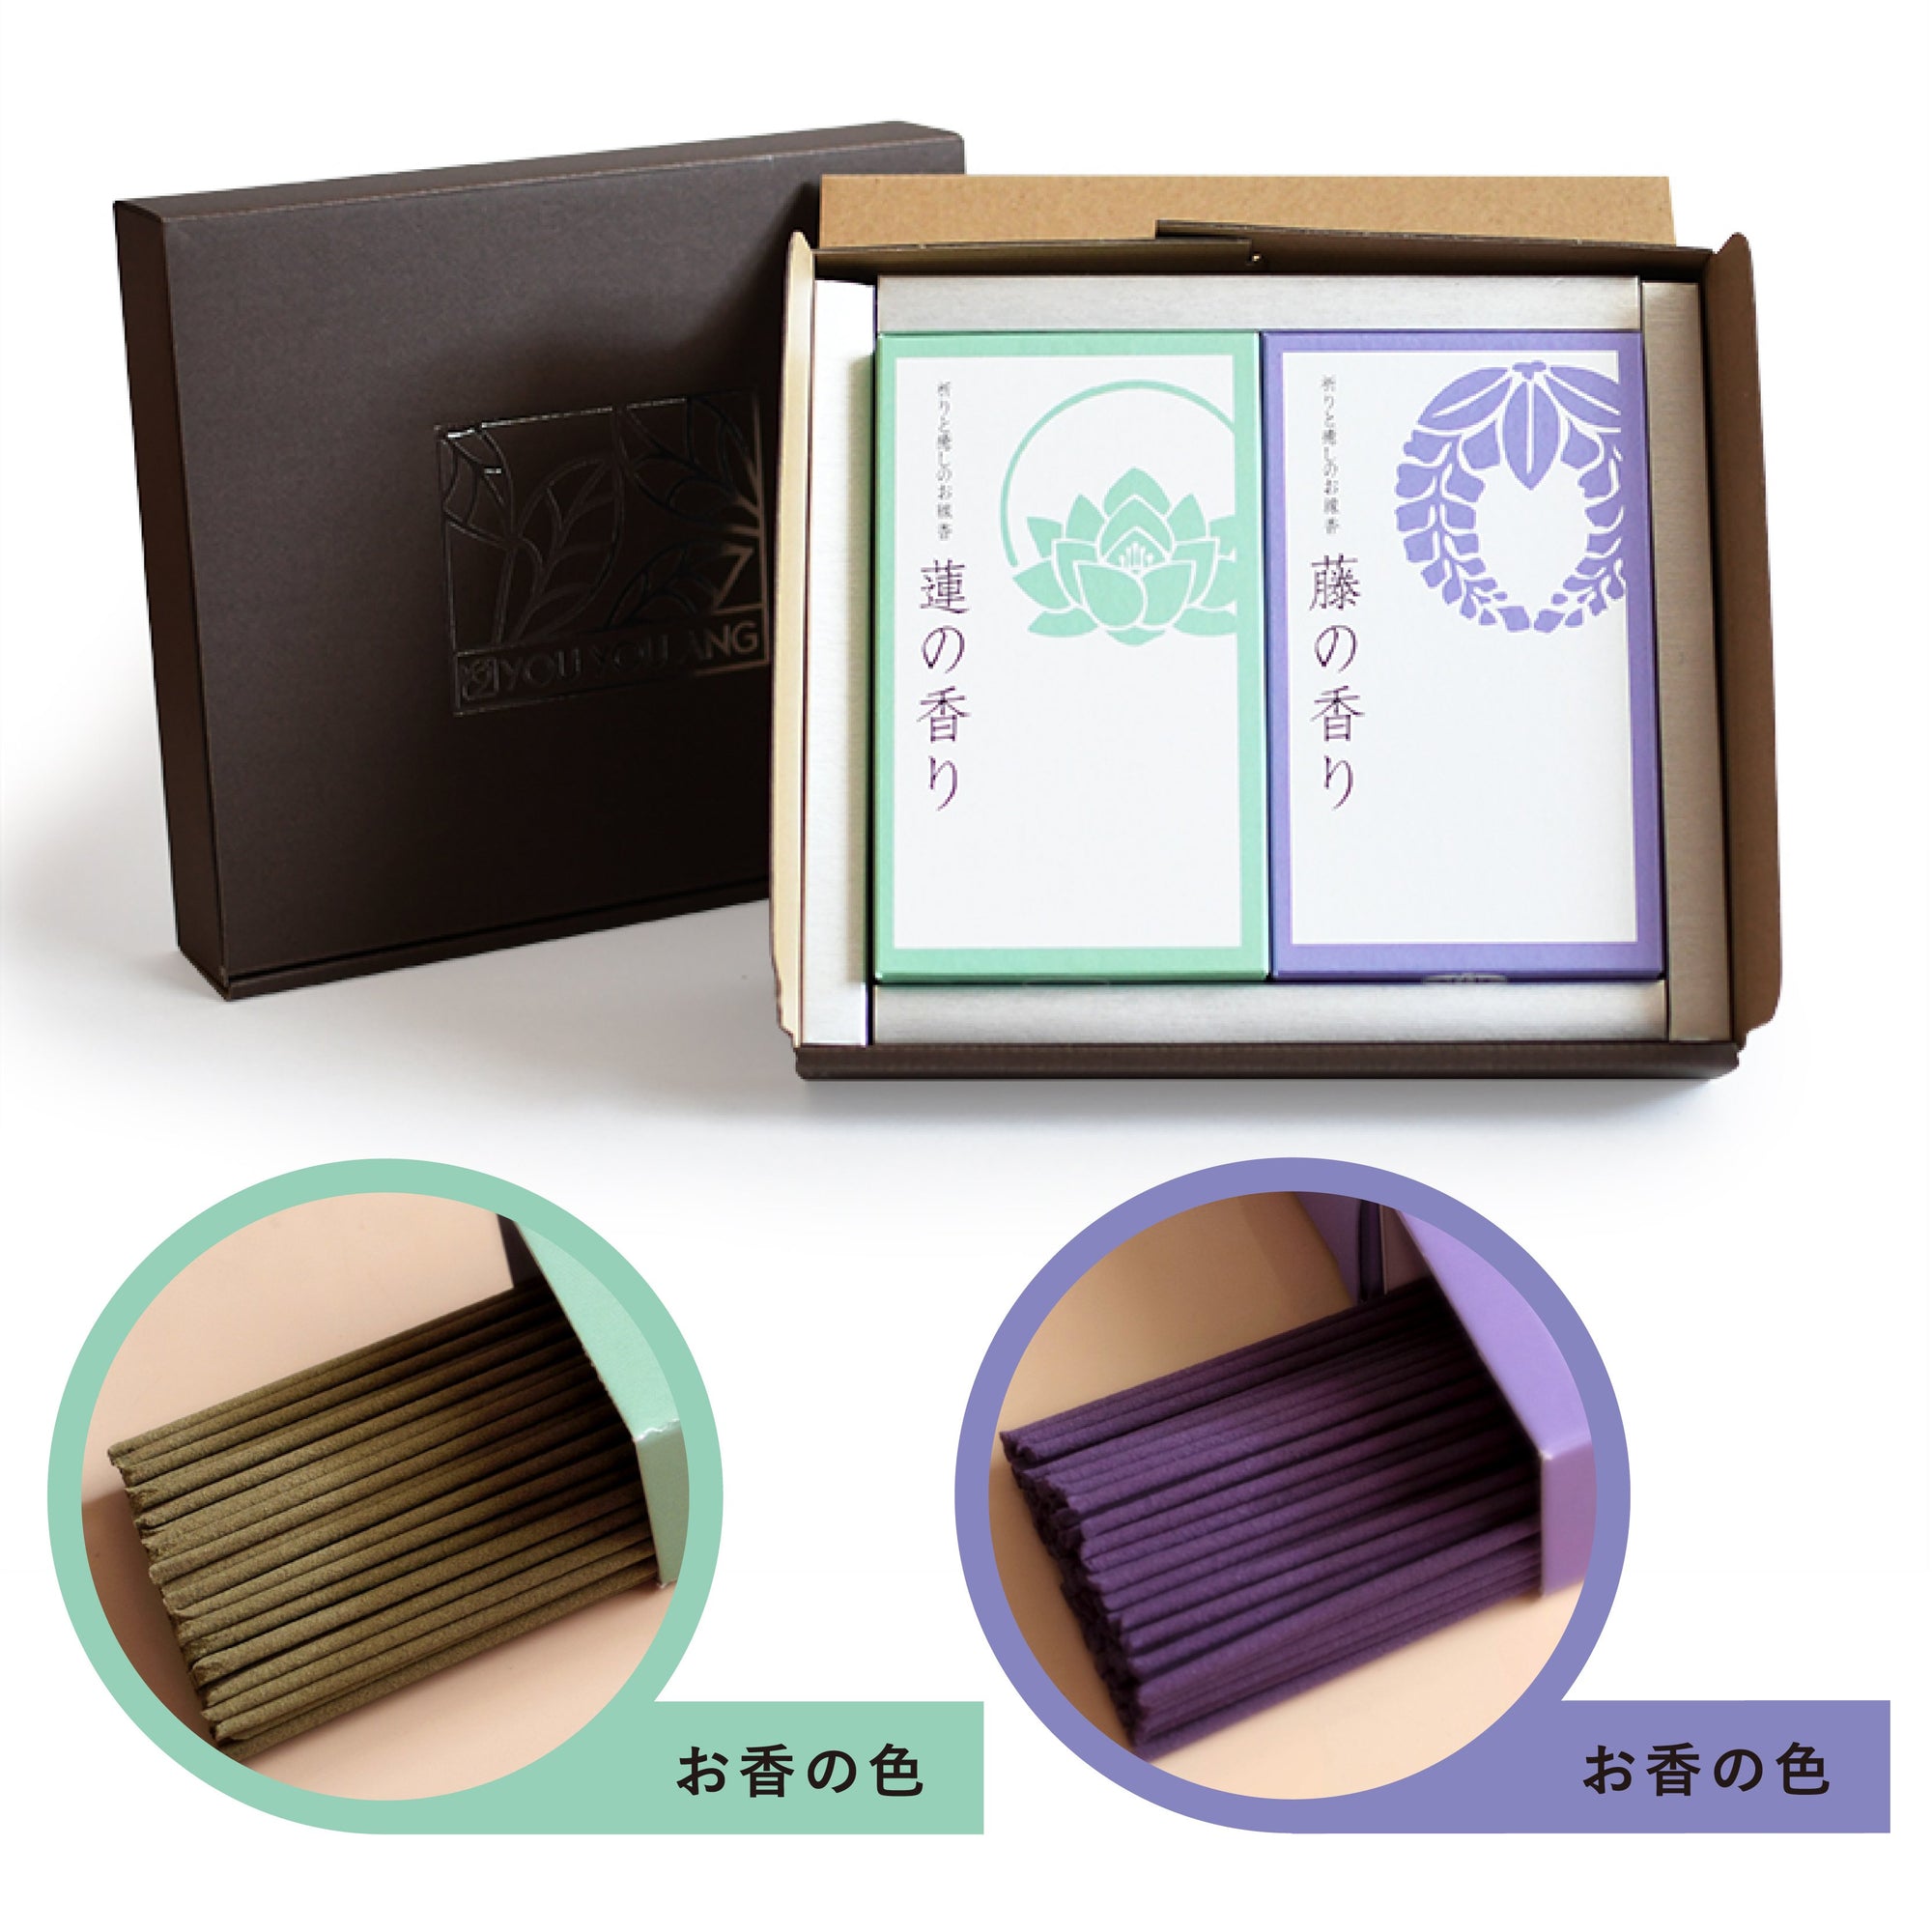 Incense for Healing / Value Box（Lotus,Wisteria）